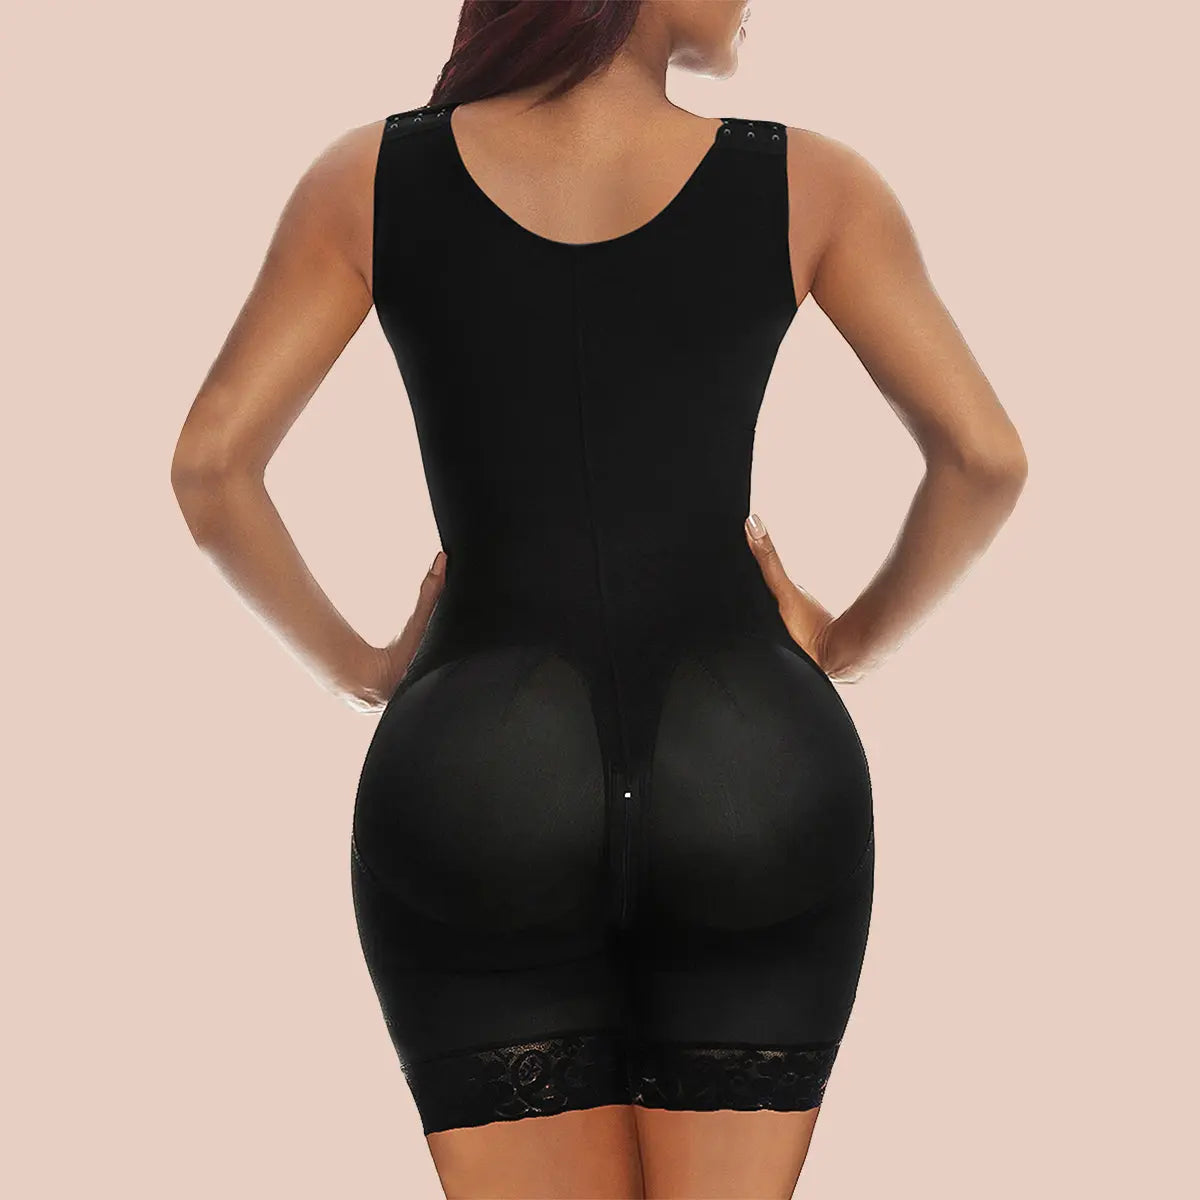 Girdle Faja Premium Shapewear Body Shaper Bodysuit for women Shapewear made  with high compression fabric. Burn fat and water for fast weight loss.